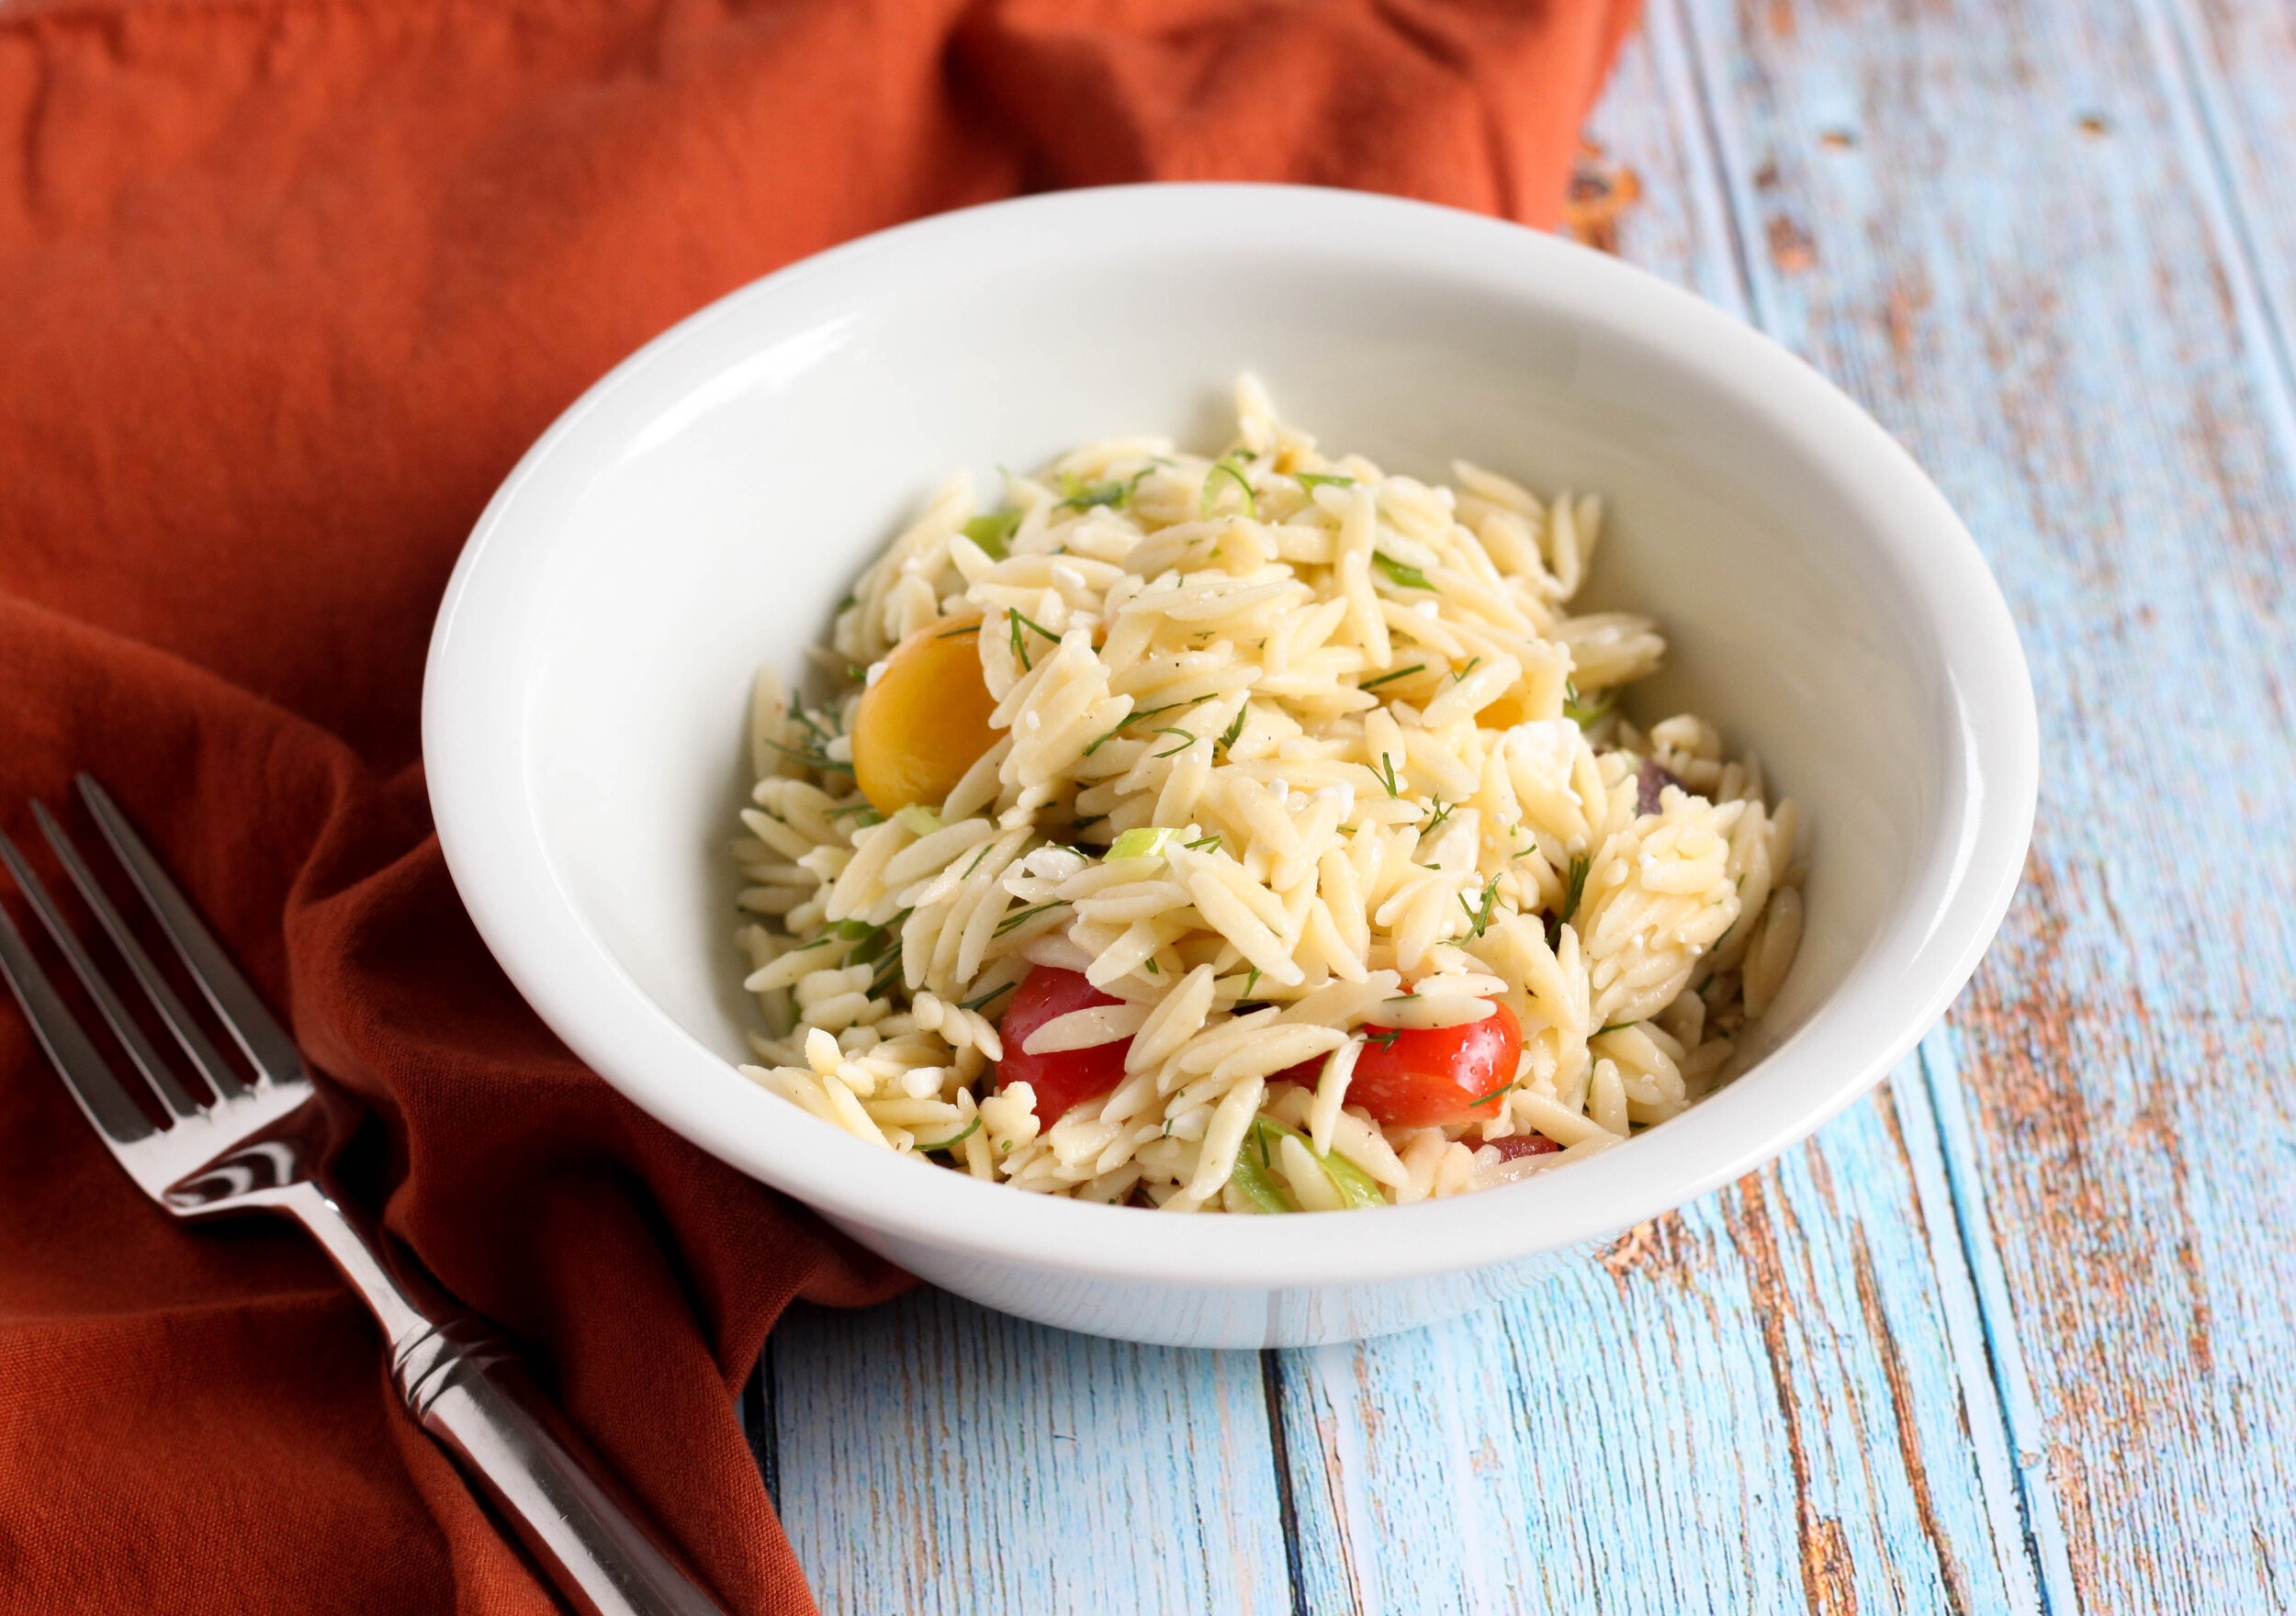 Orzo Salad with Dill, Tomatoes and Feta